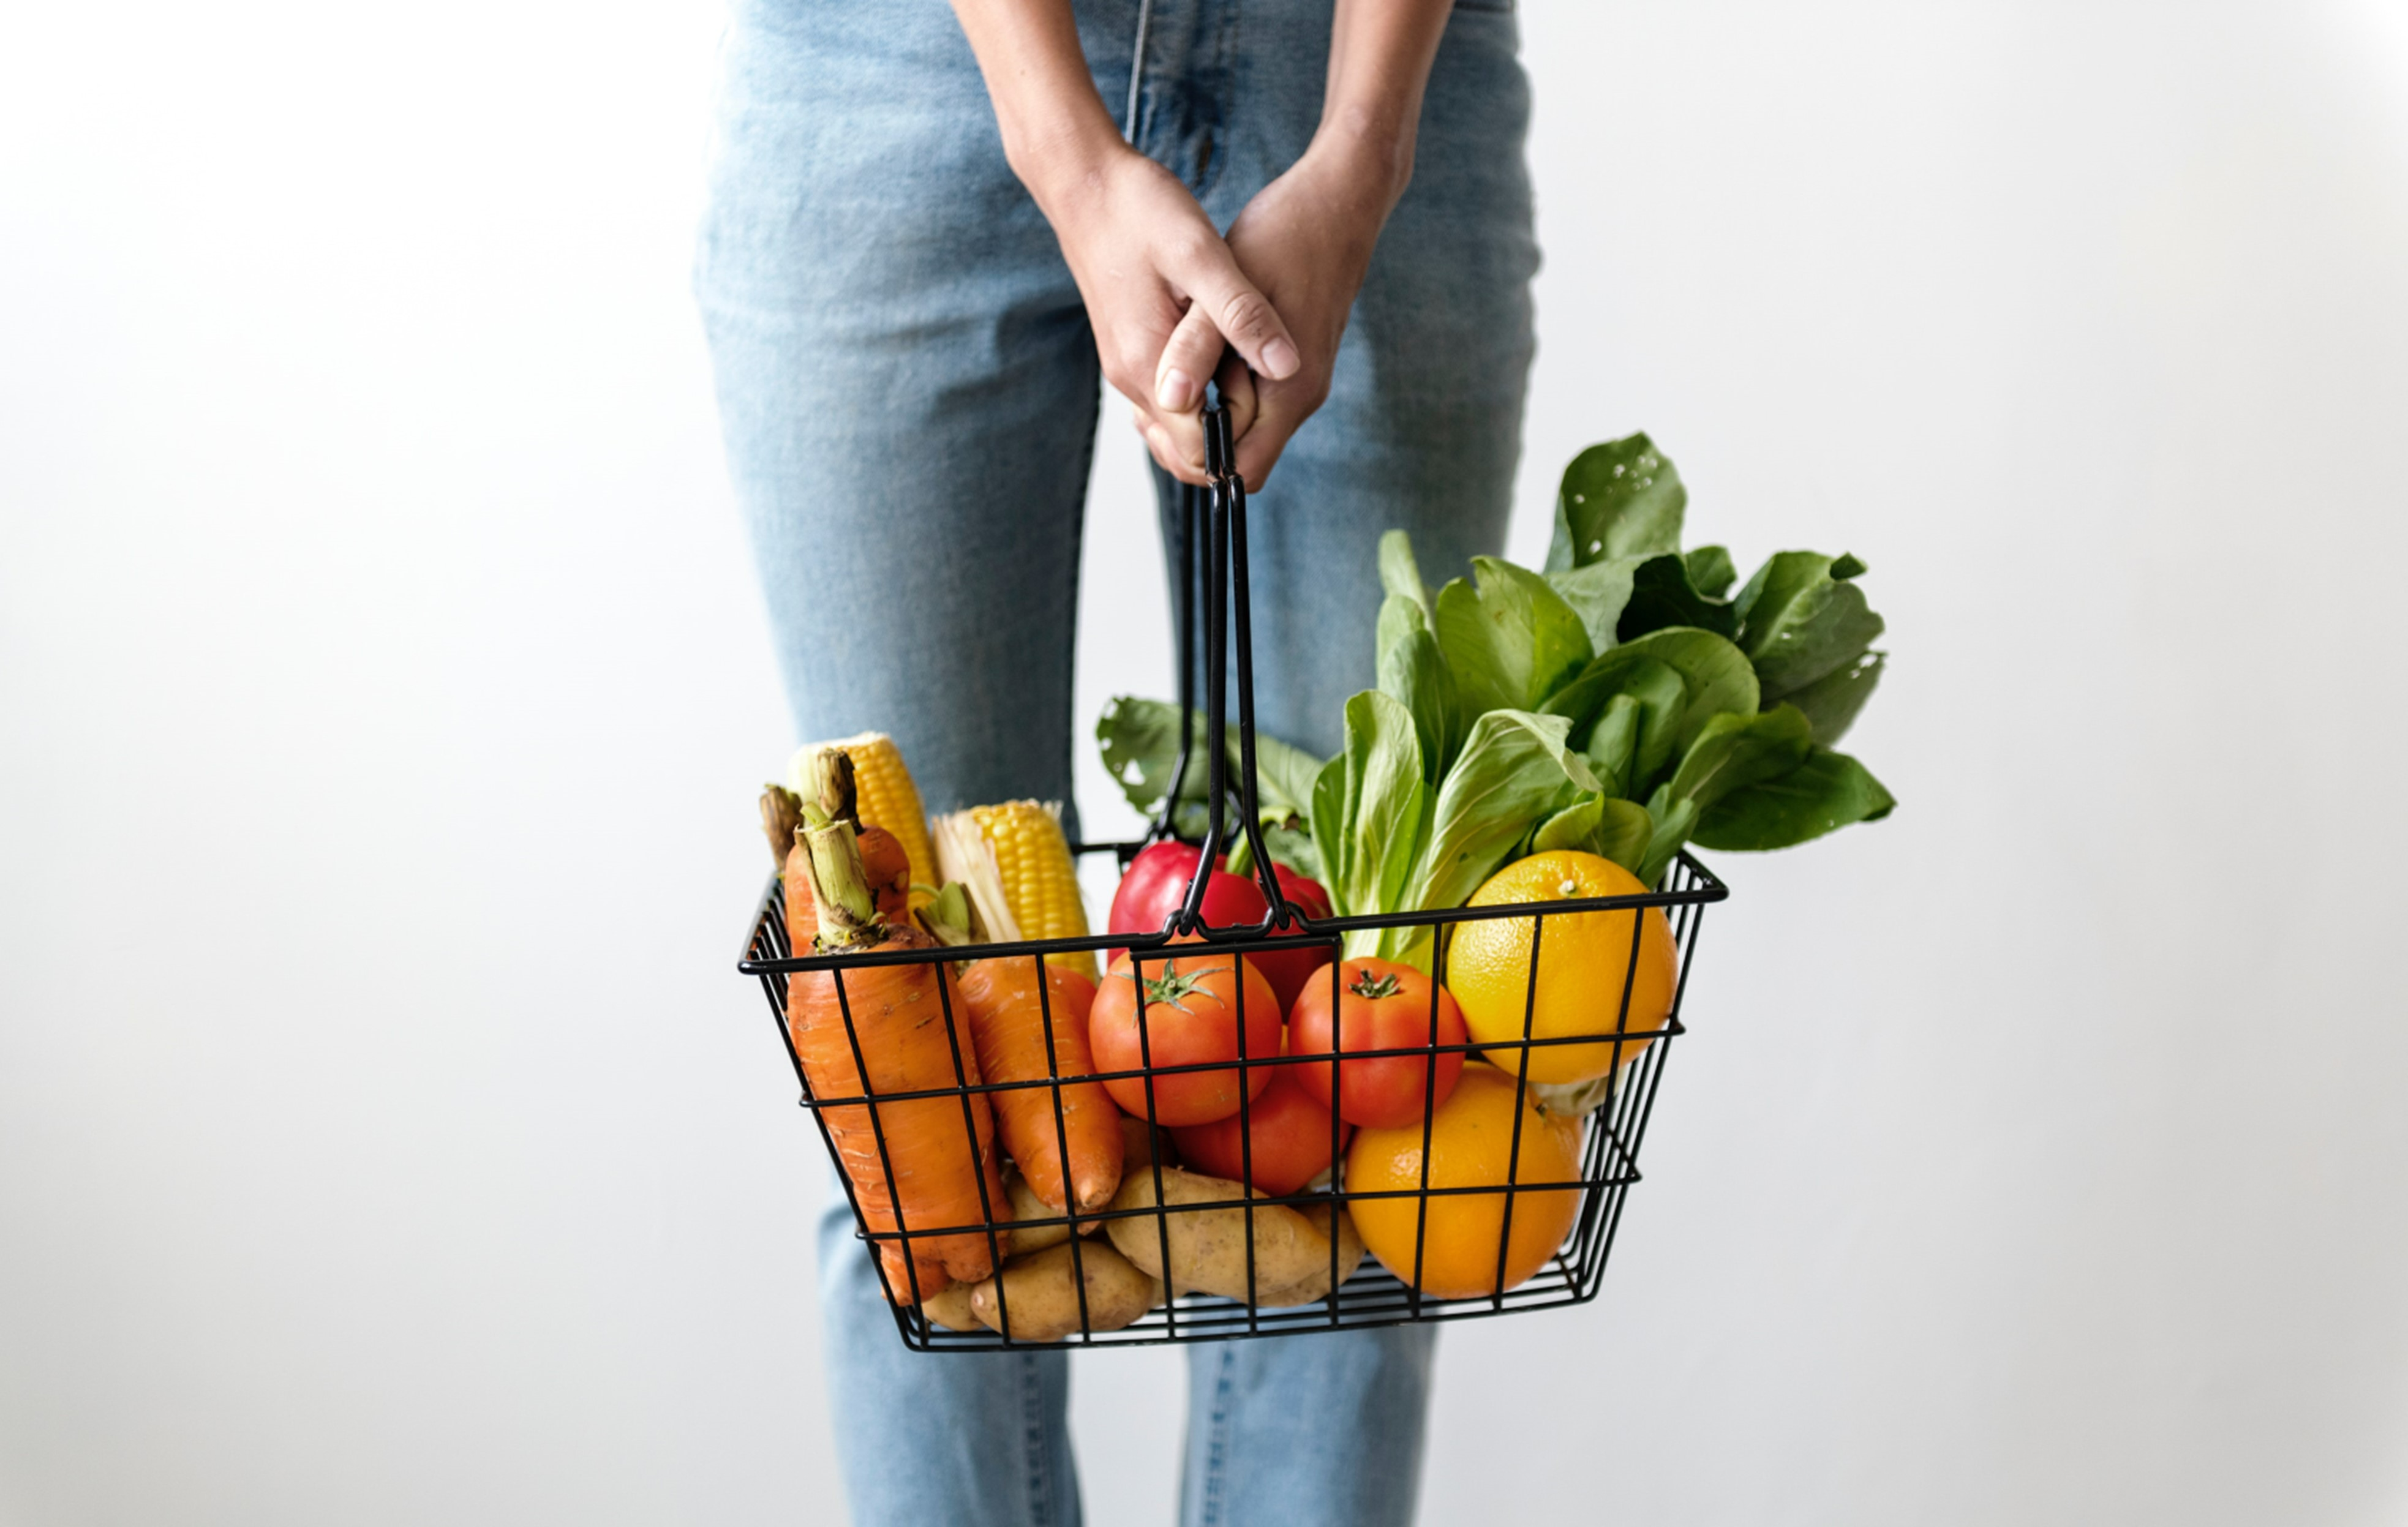 picture of a lady holding a metal basket full of produce, from waist down